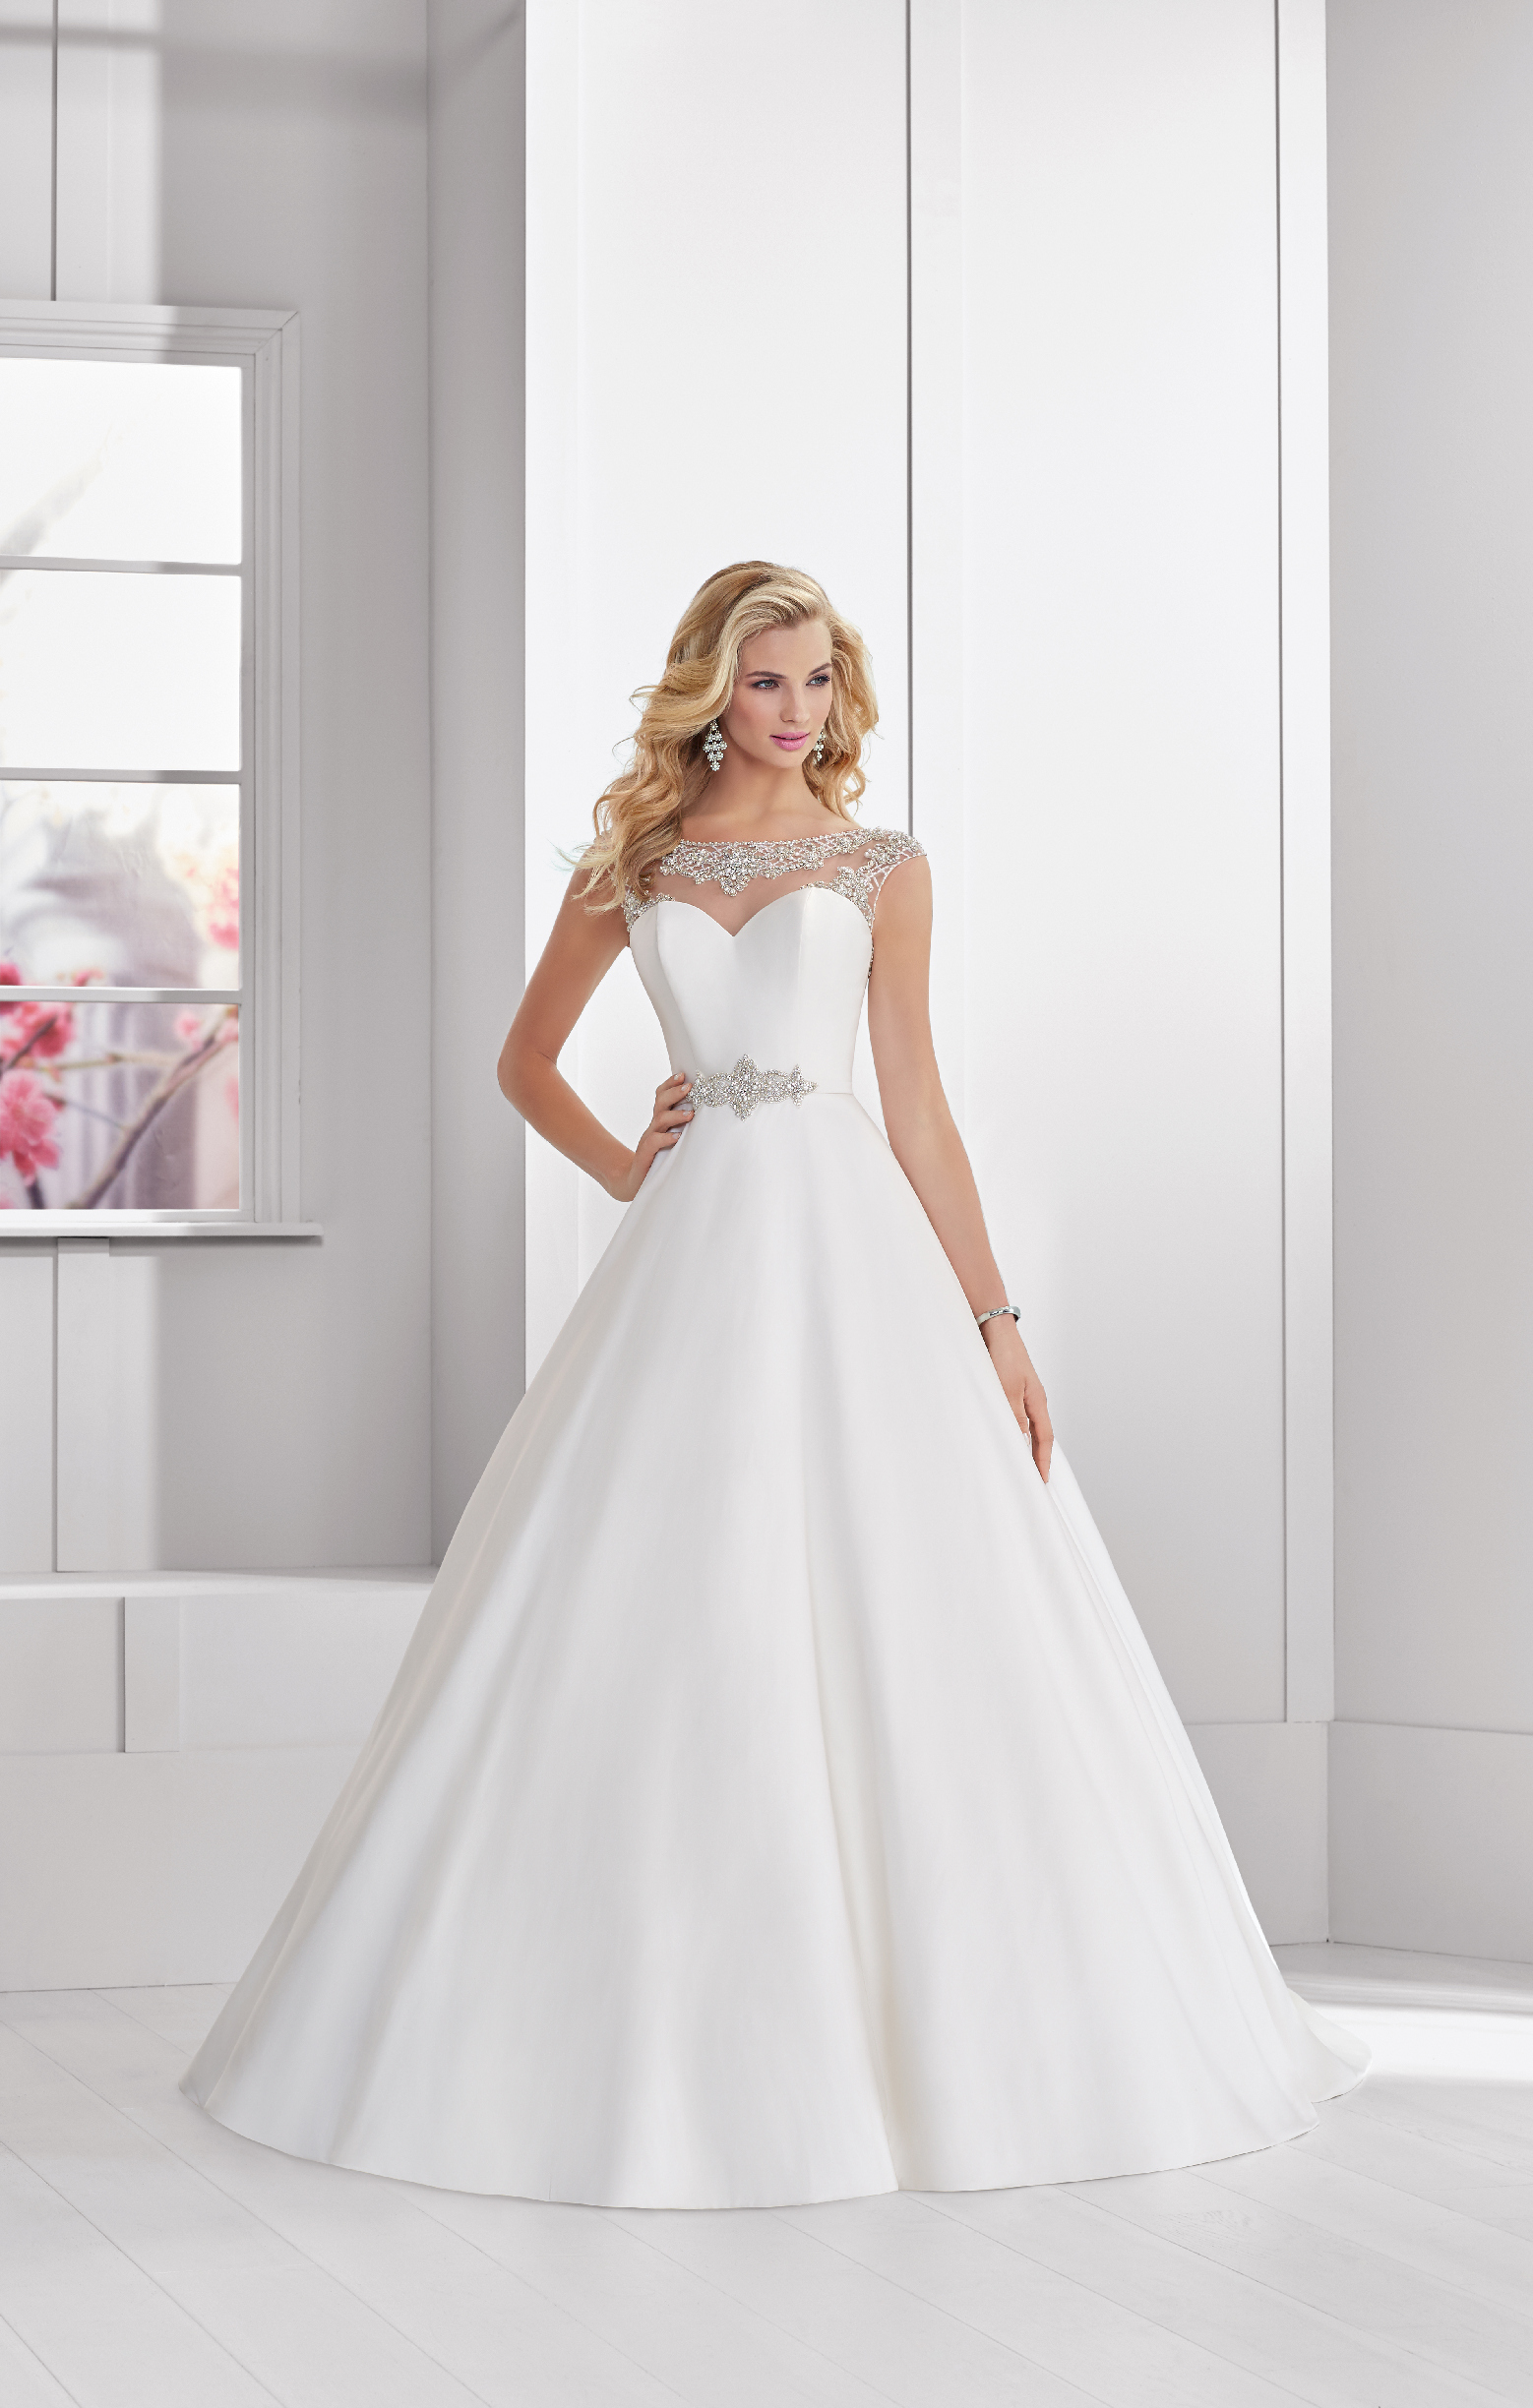 Model in Ronald Joyce wedding dress 69312 - a beautiful ballgown with an illusion sweetheart neckline and sparkle belt that's perfect if you need a wedding dress quickly.